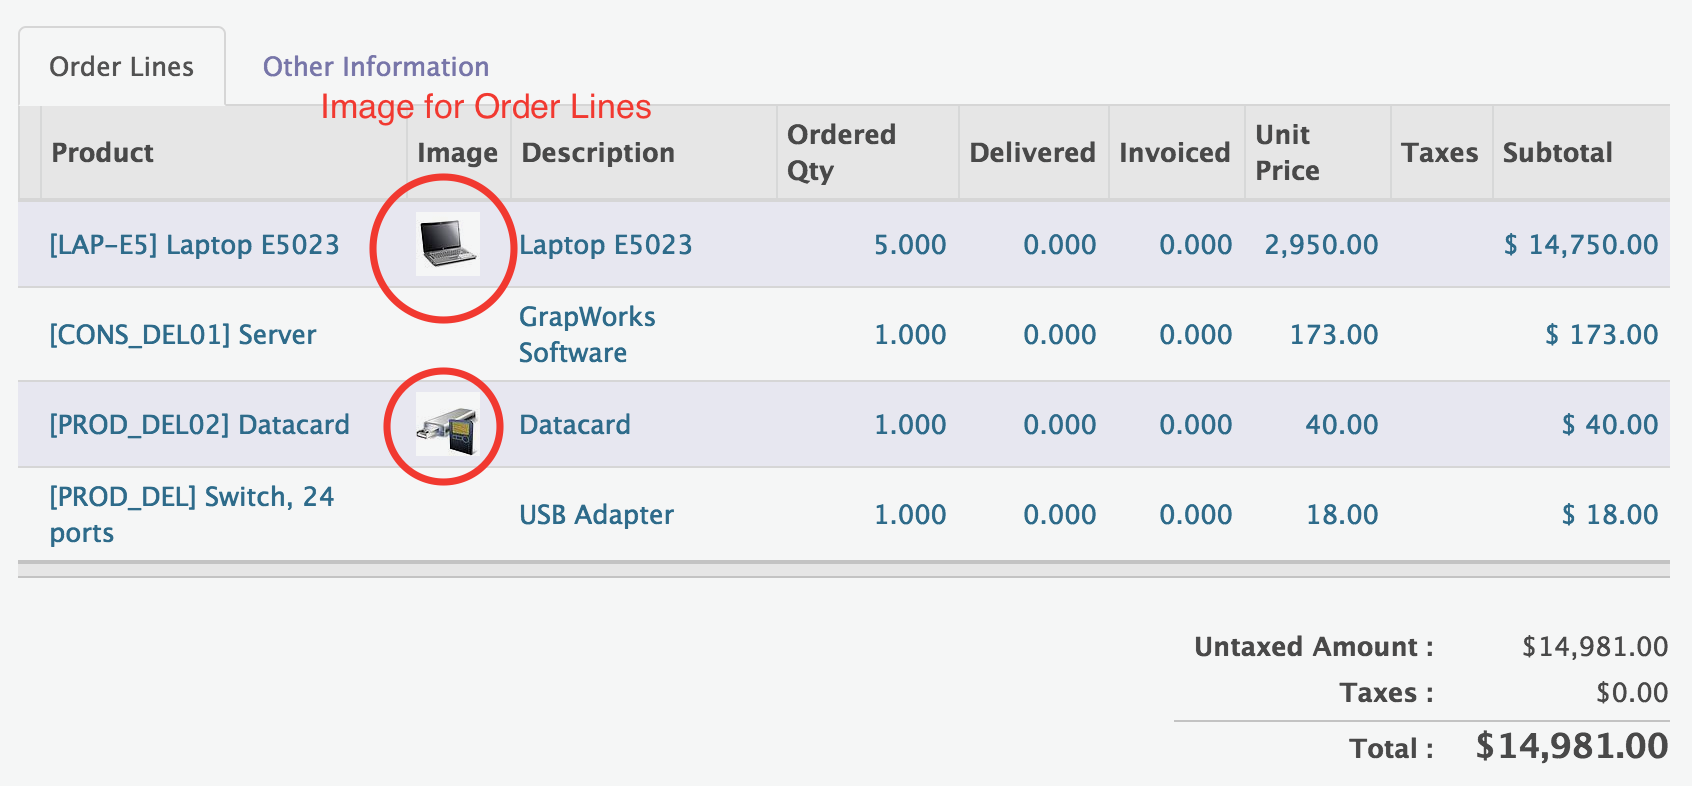 Purchase Order Line Product Image